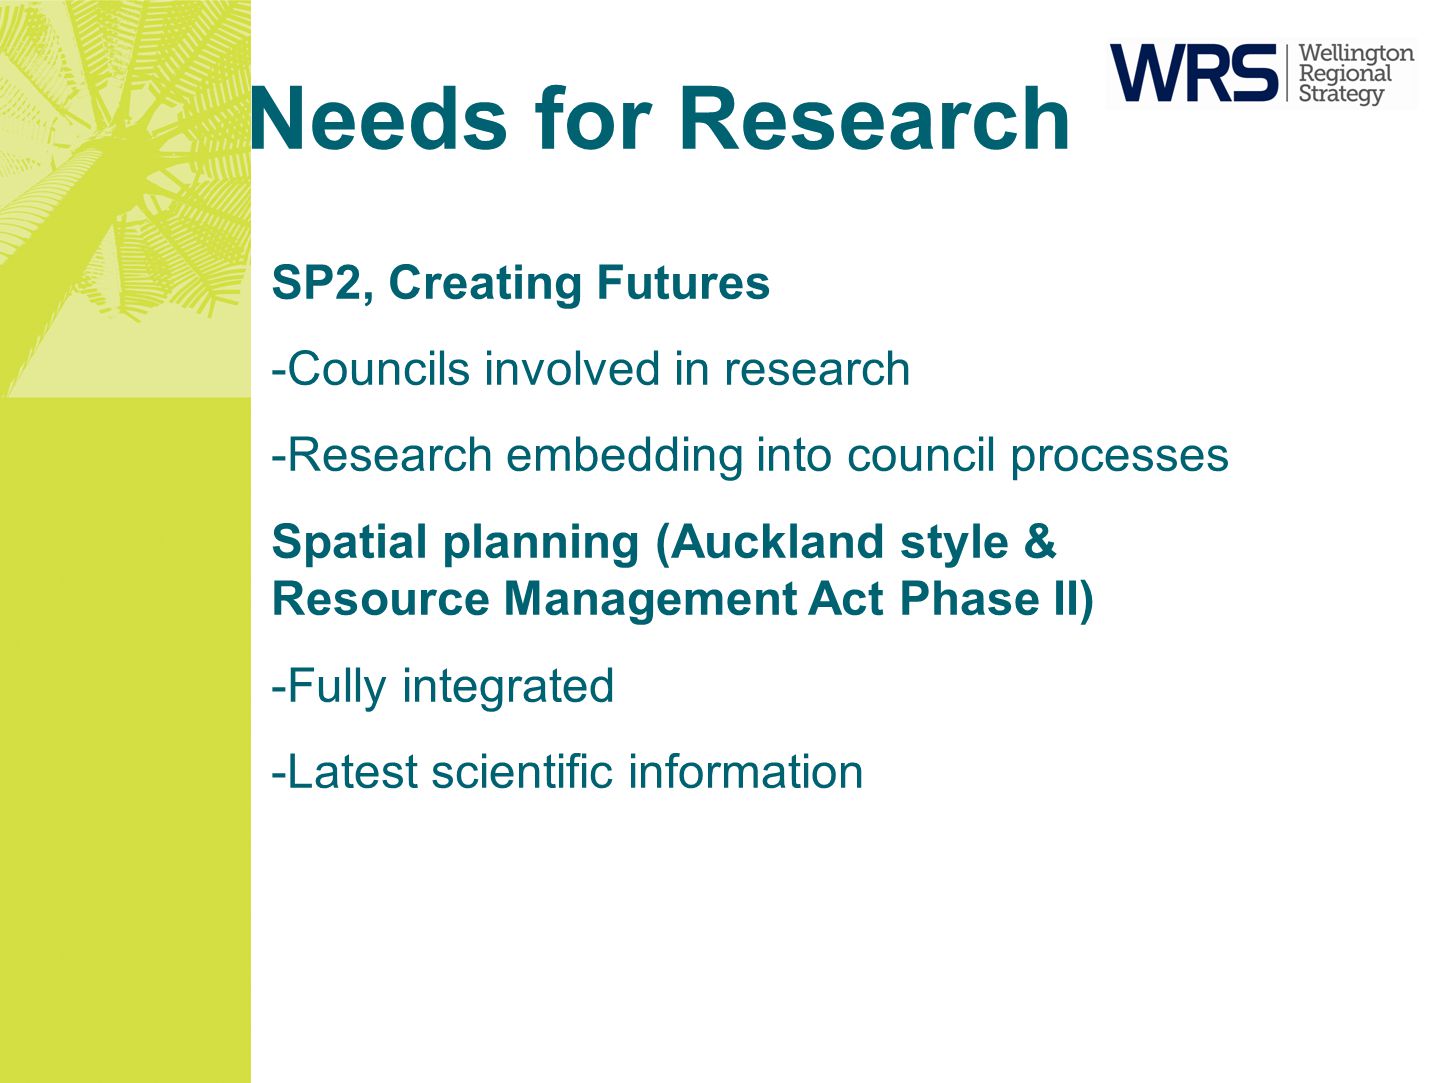 Needs for Research SP2, Creating Futures -Councils involved in research -Research embedding into council processes Spatial planning (Auckland style & Resource Management Act Phase II) -Fully integrated -Latest scientific information